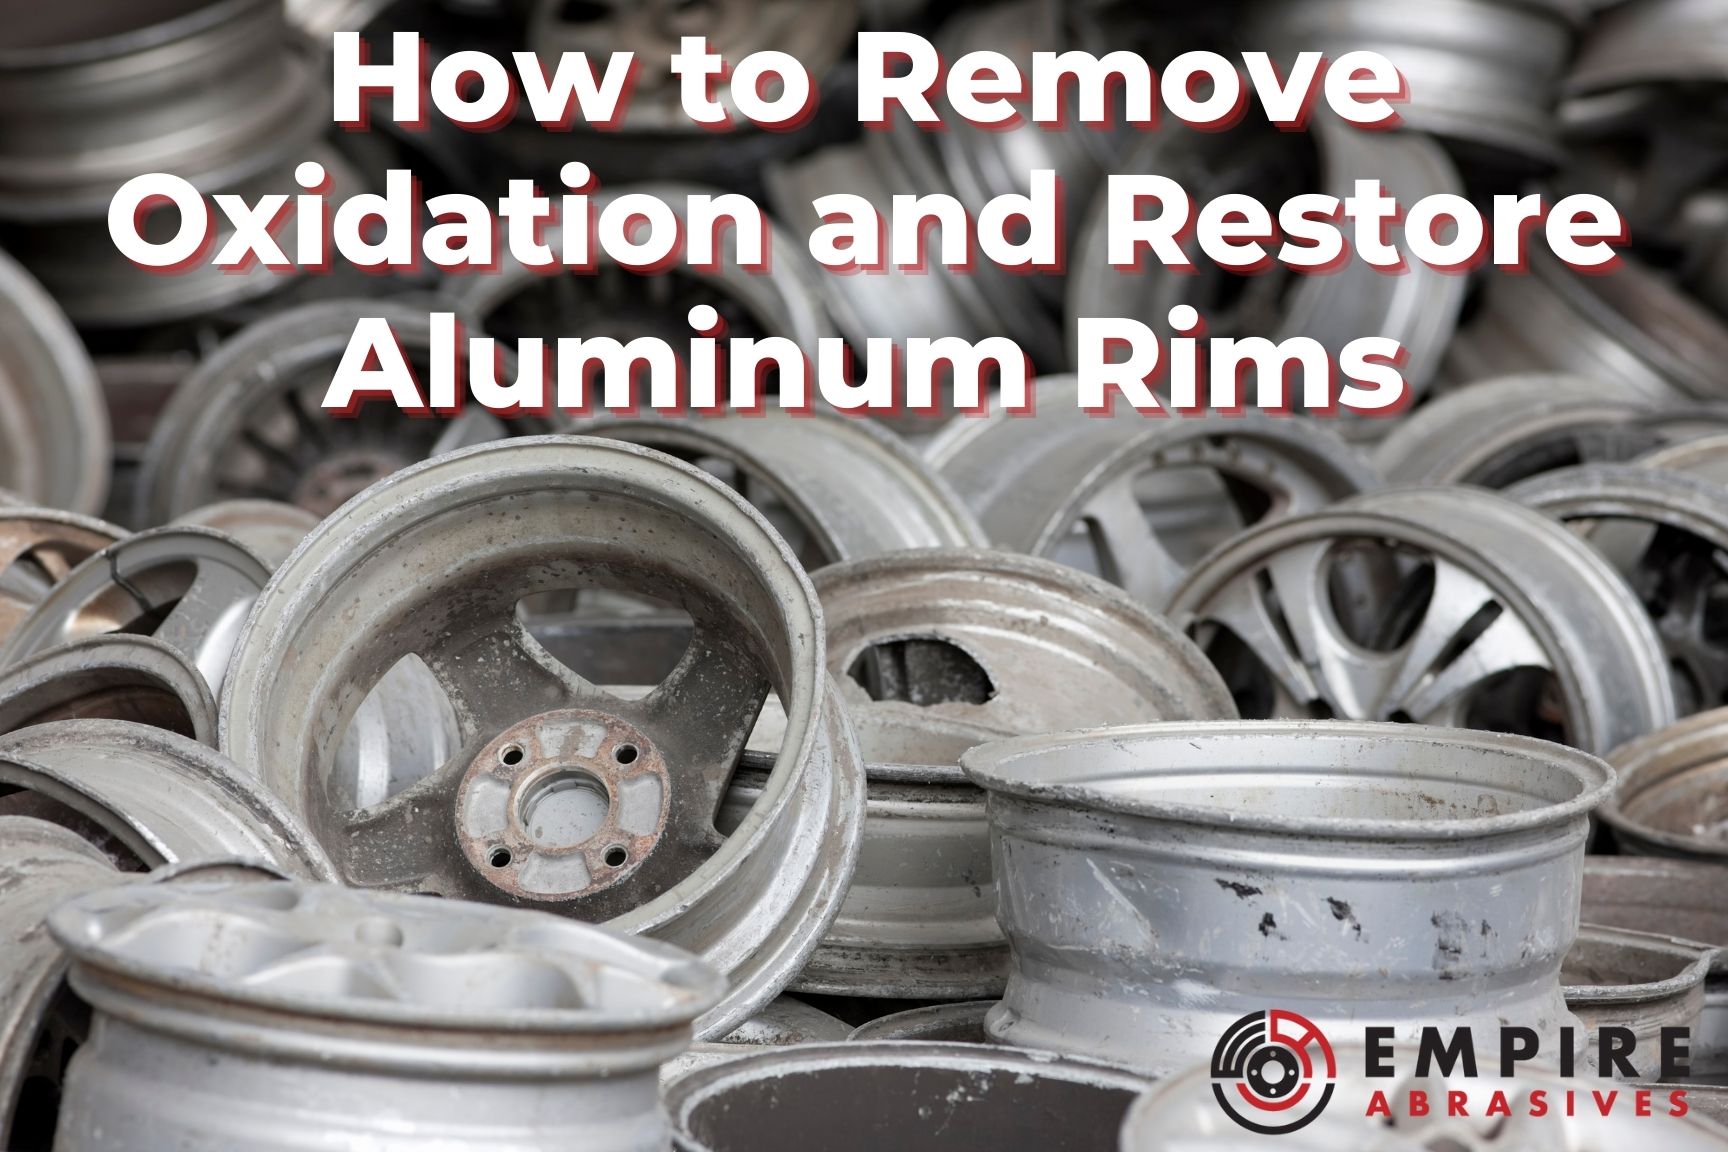 How to Remove Oxidation and Restore Aluminum Rims - Empire Abrasives